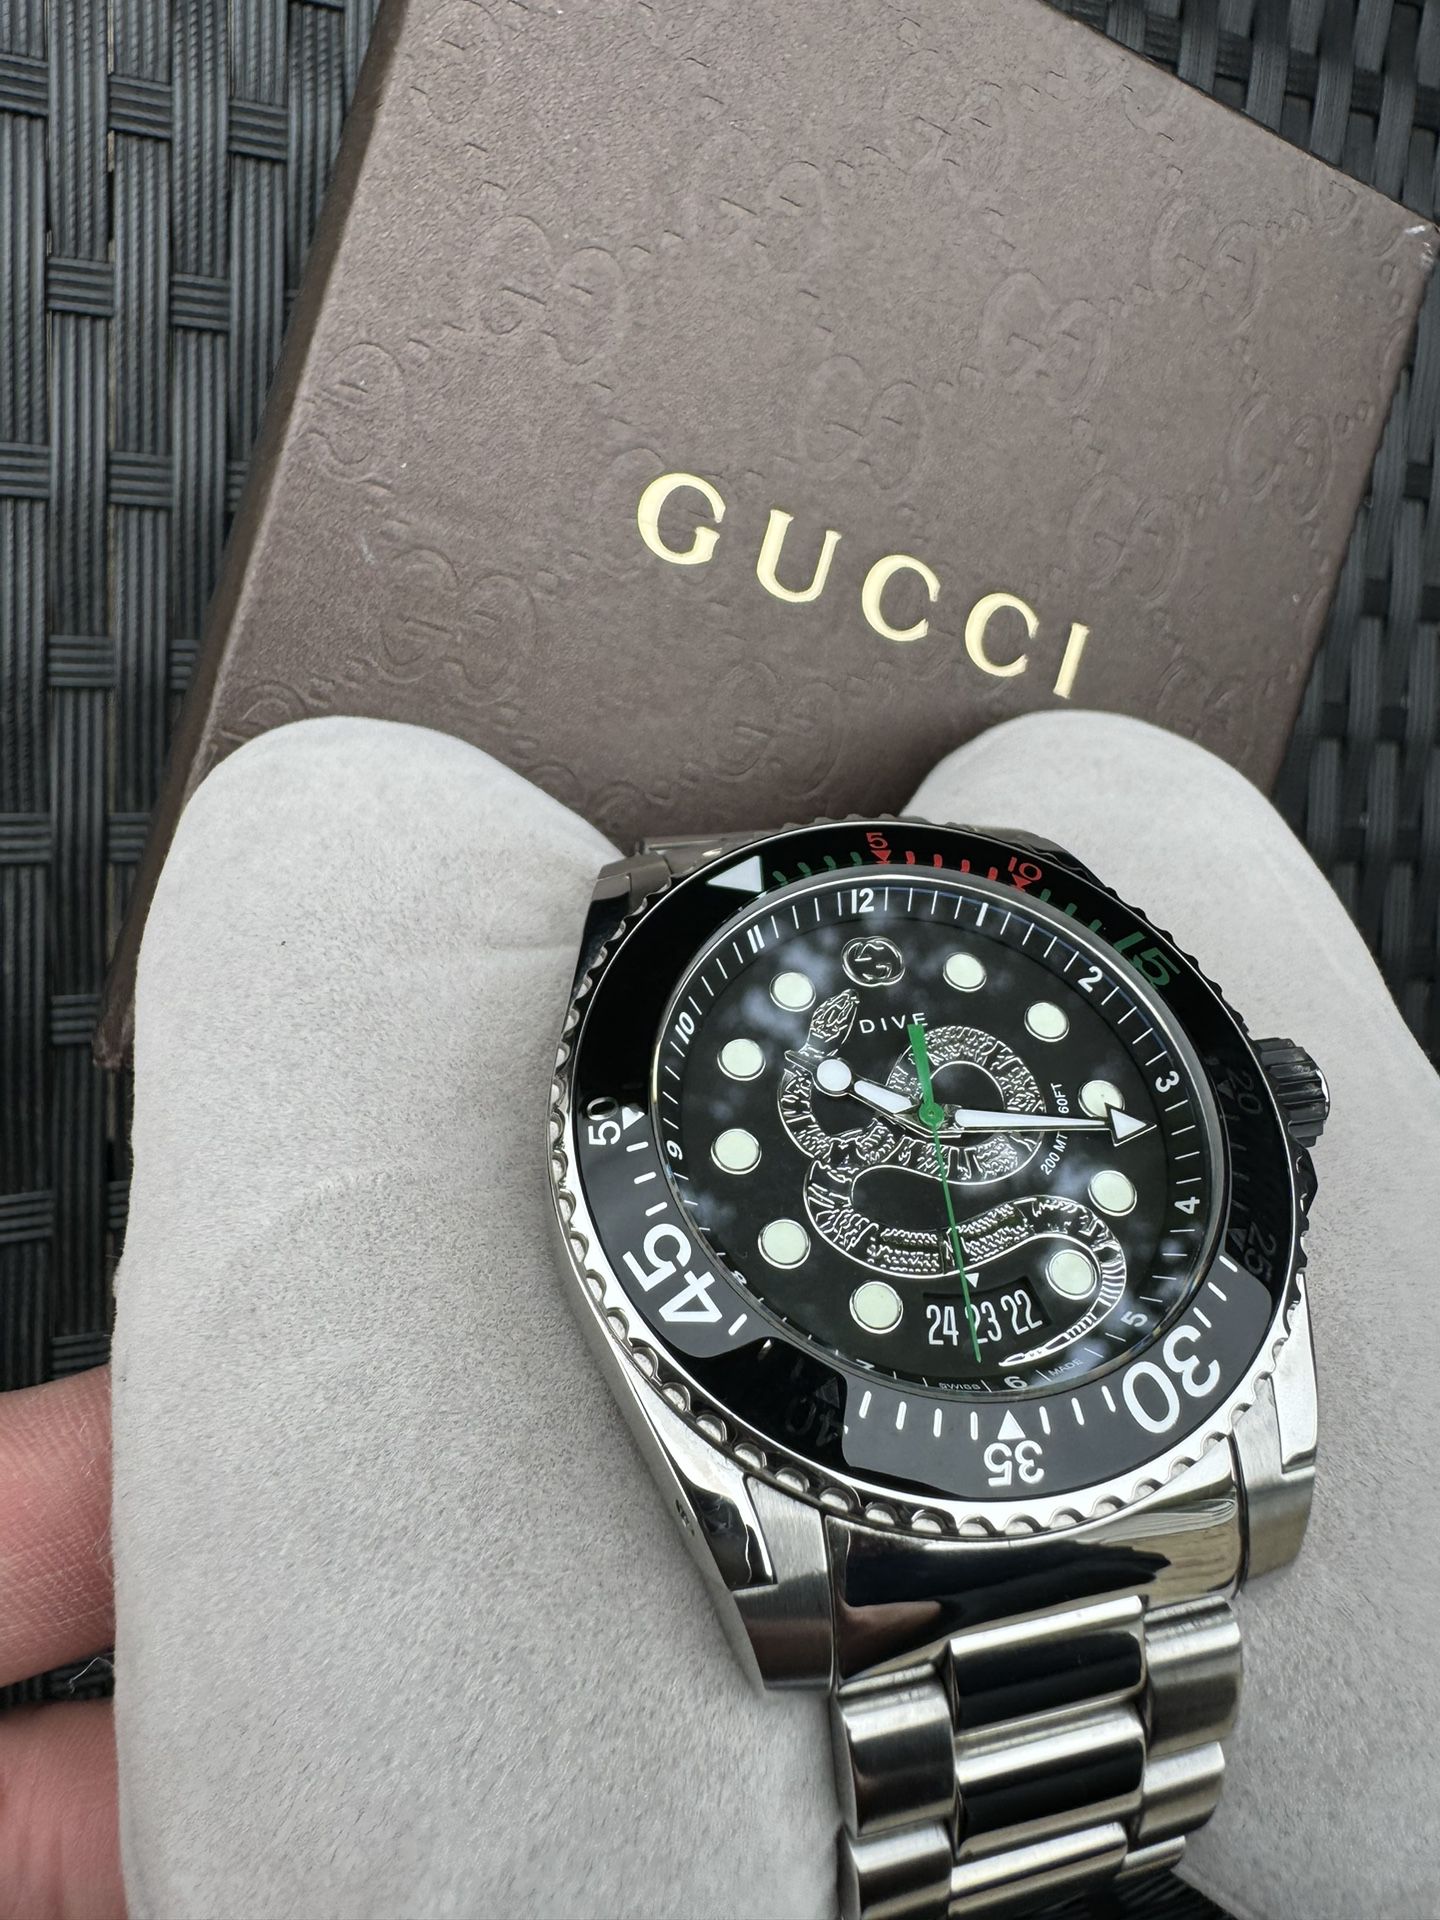 Gucci Men Watch Diver Dive 45MM Stainless Steel King Snake Dial Bracelet Glows in the Dark 